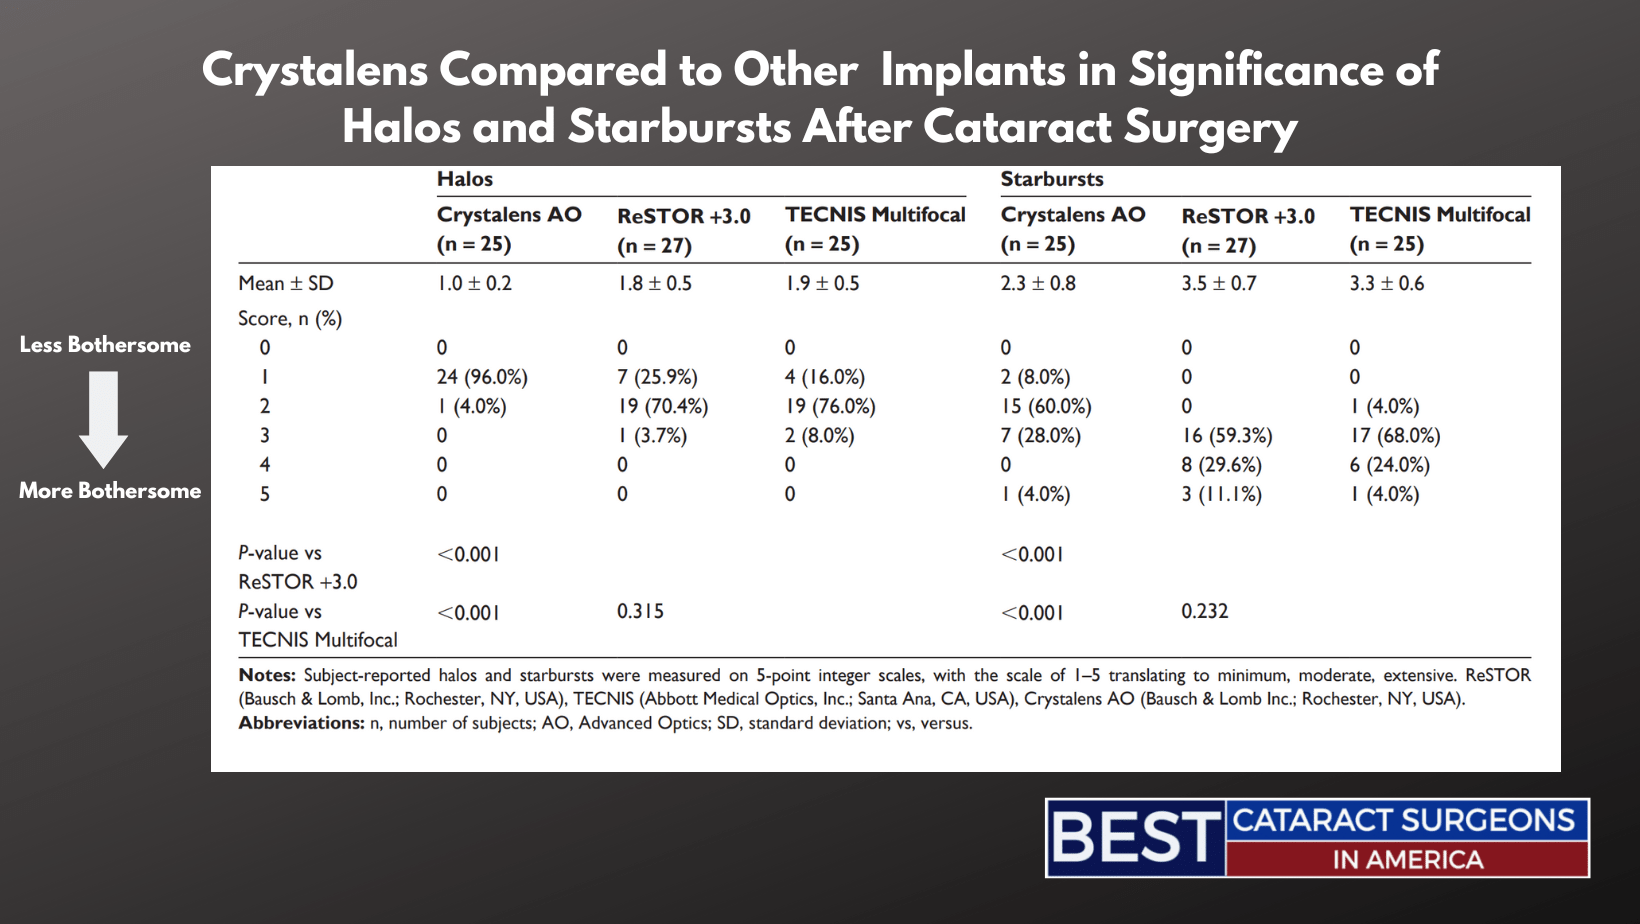 Crystalens compared to other implants in significance of Halos and Starbursts after Cataract Surgery chart